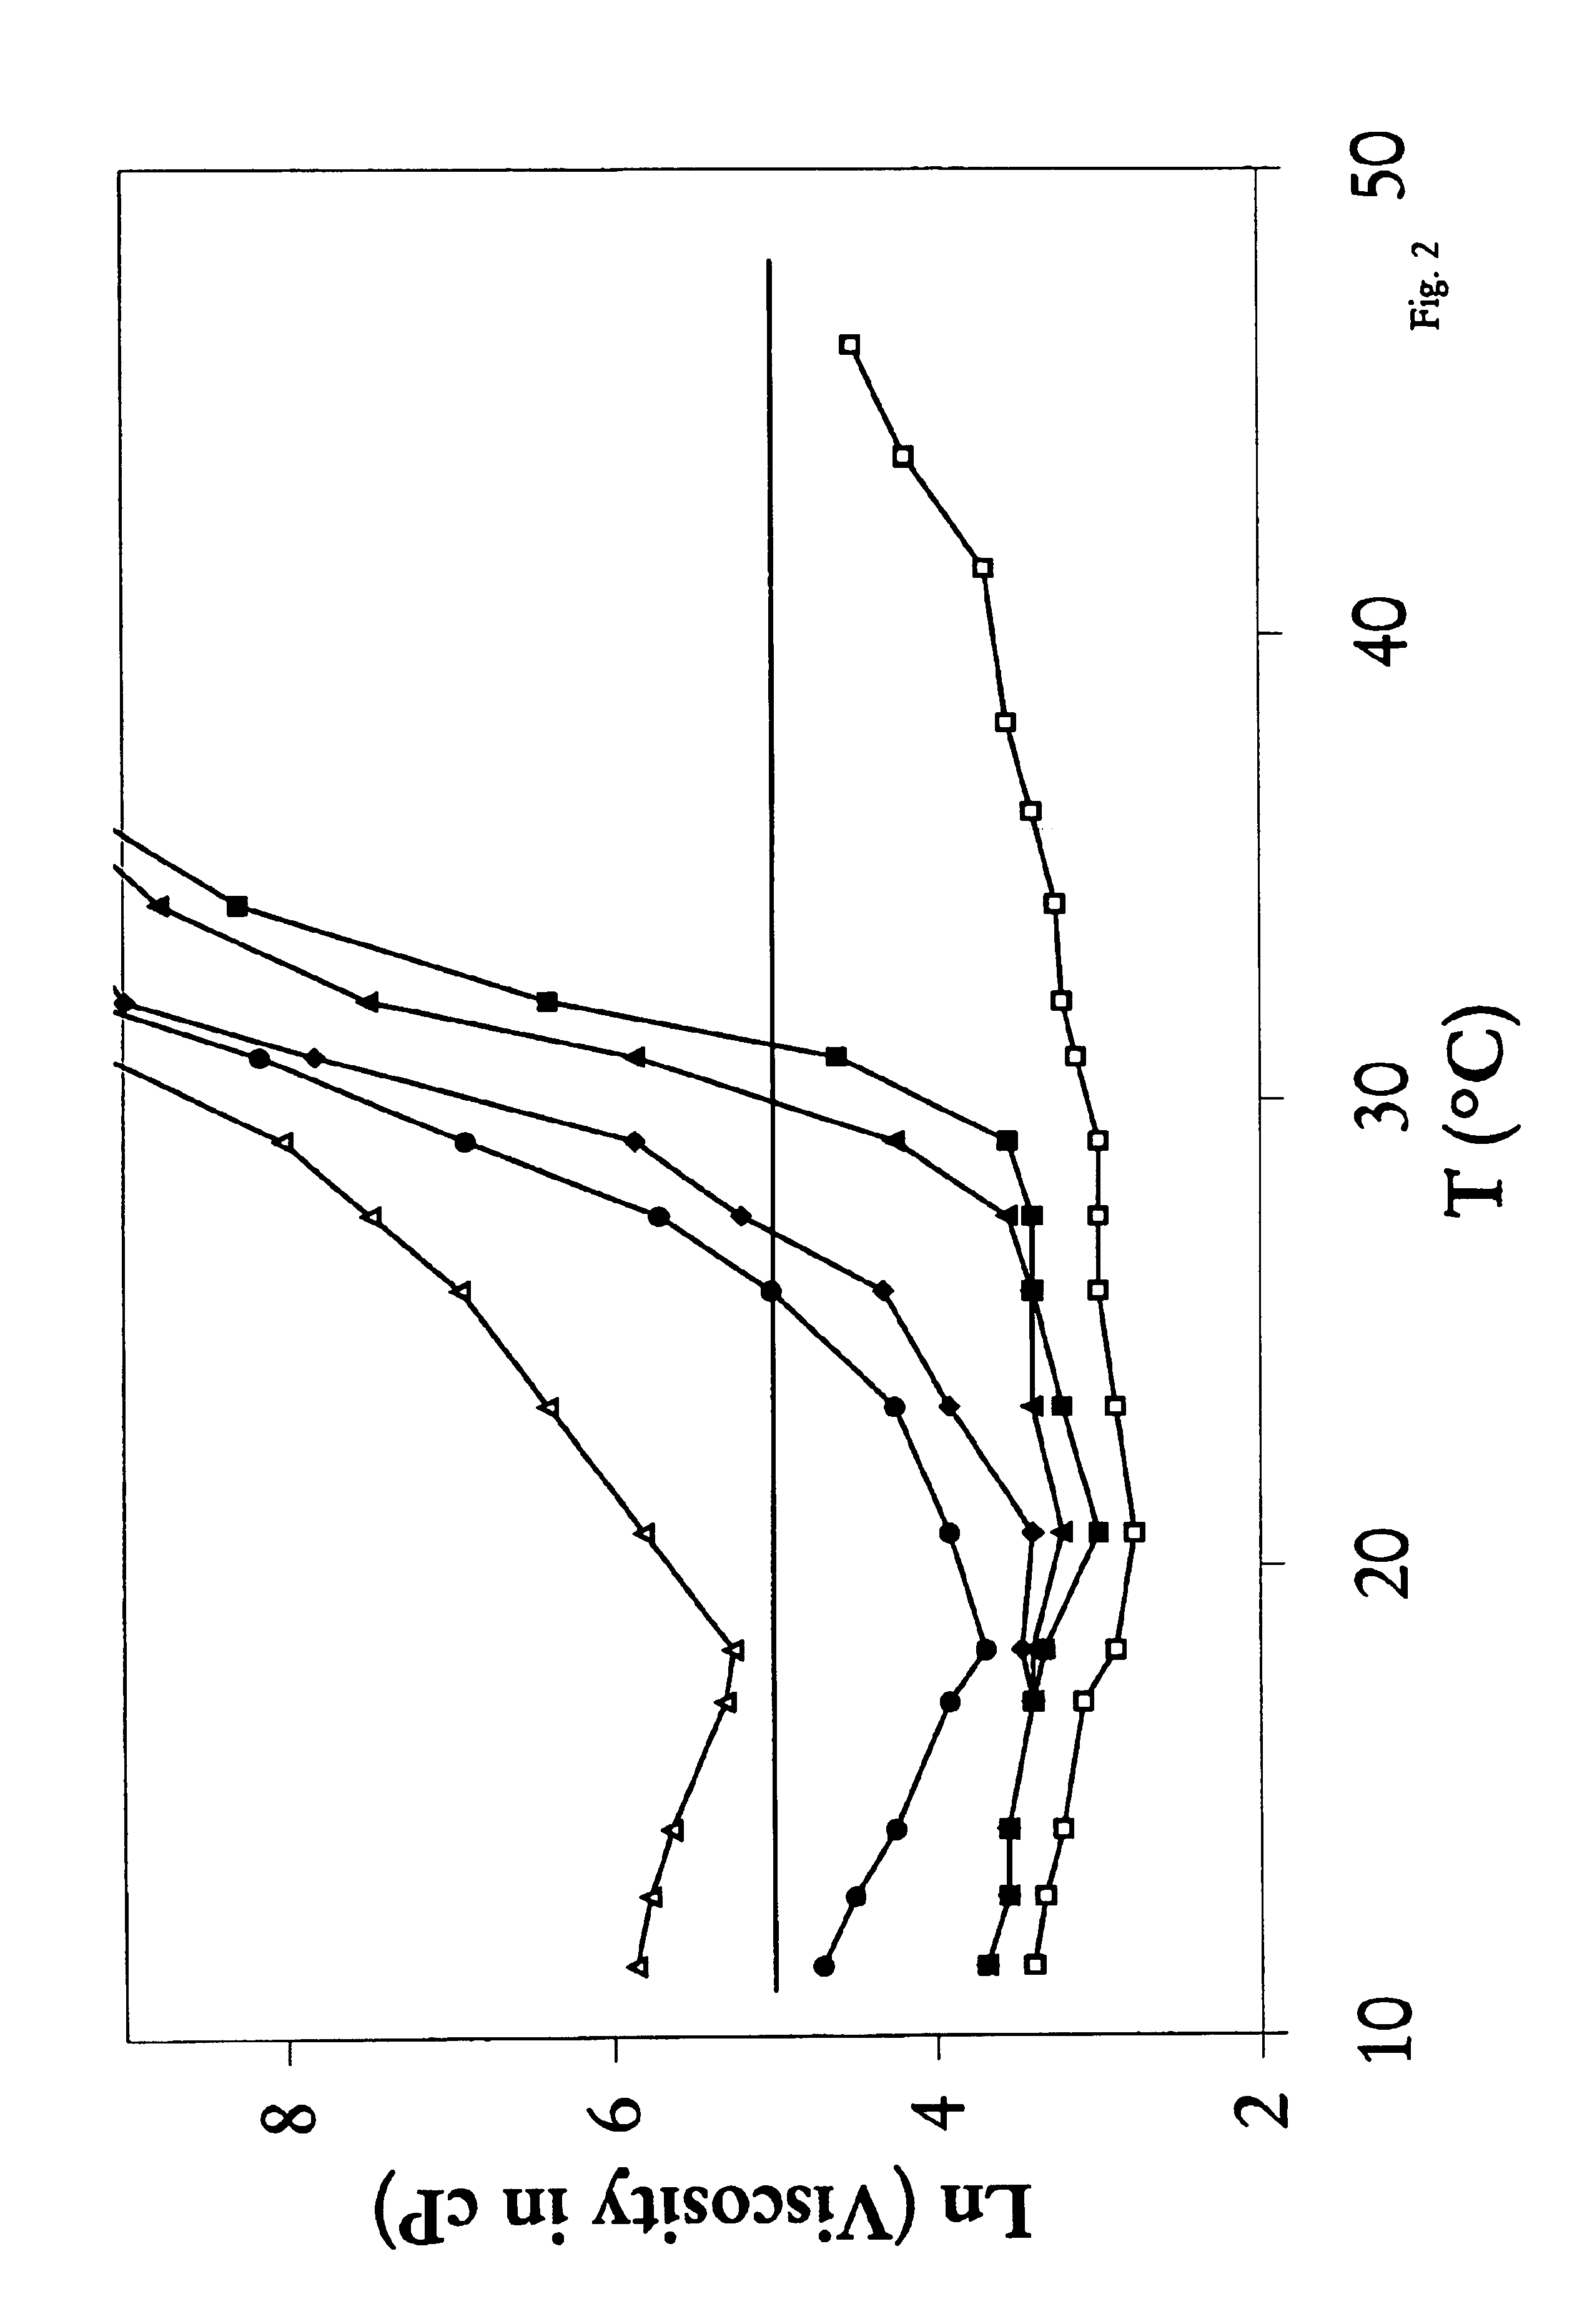 Mixtures of various triblock polyester polyethylene glycol copolymers having improved gel properties